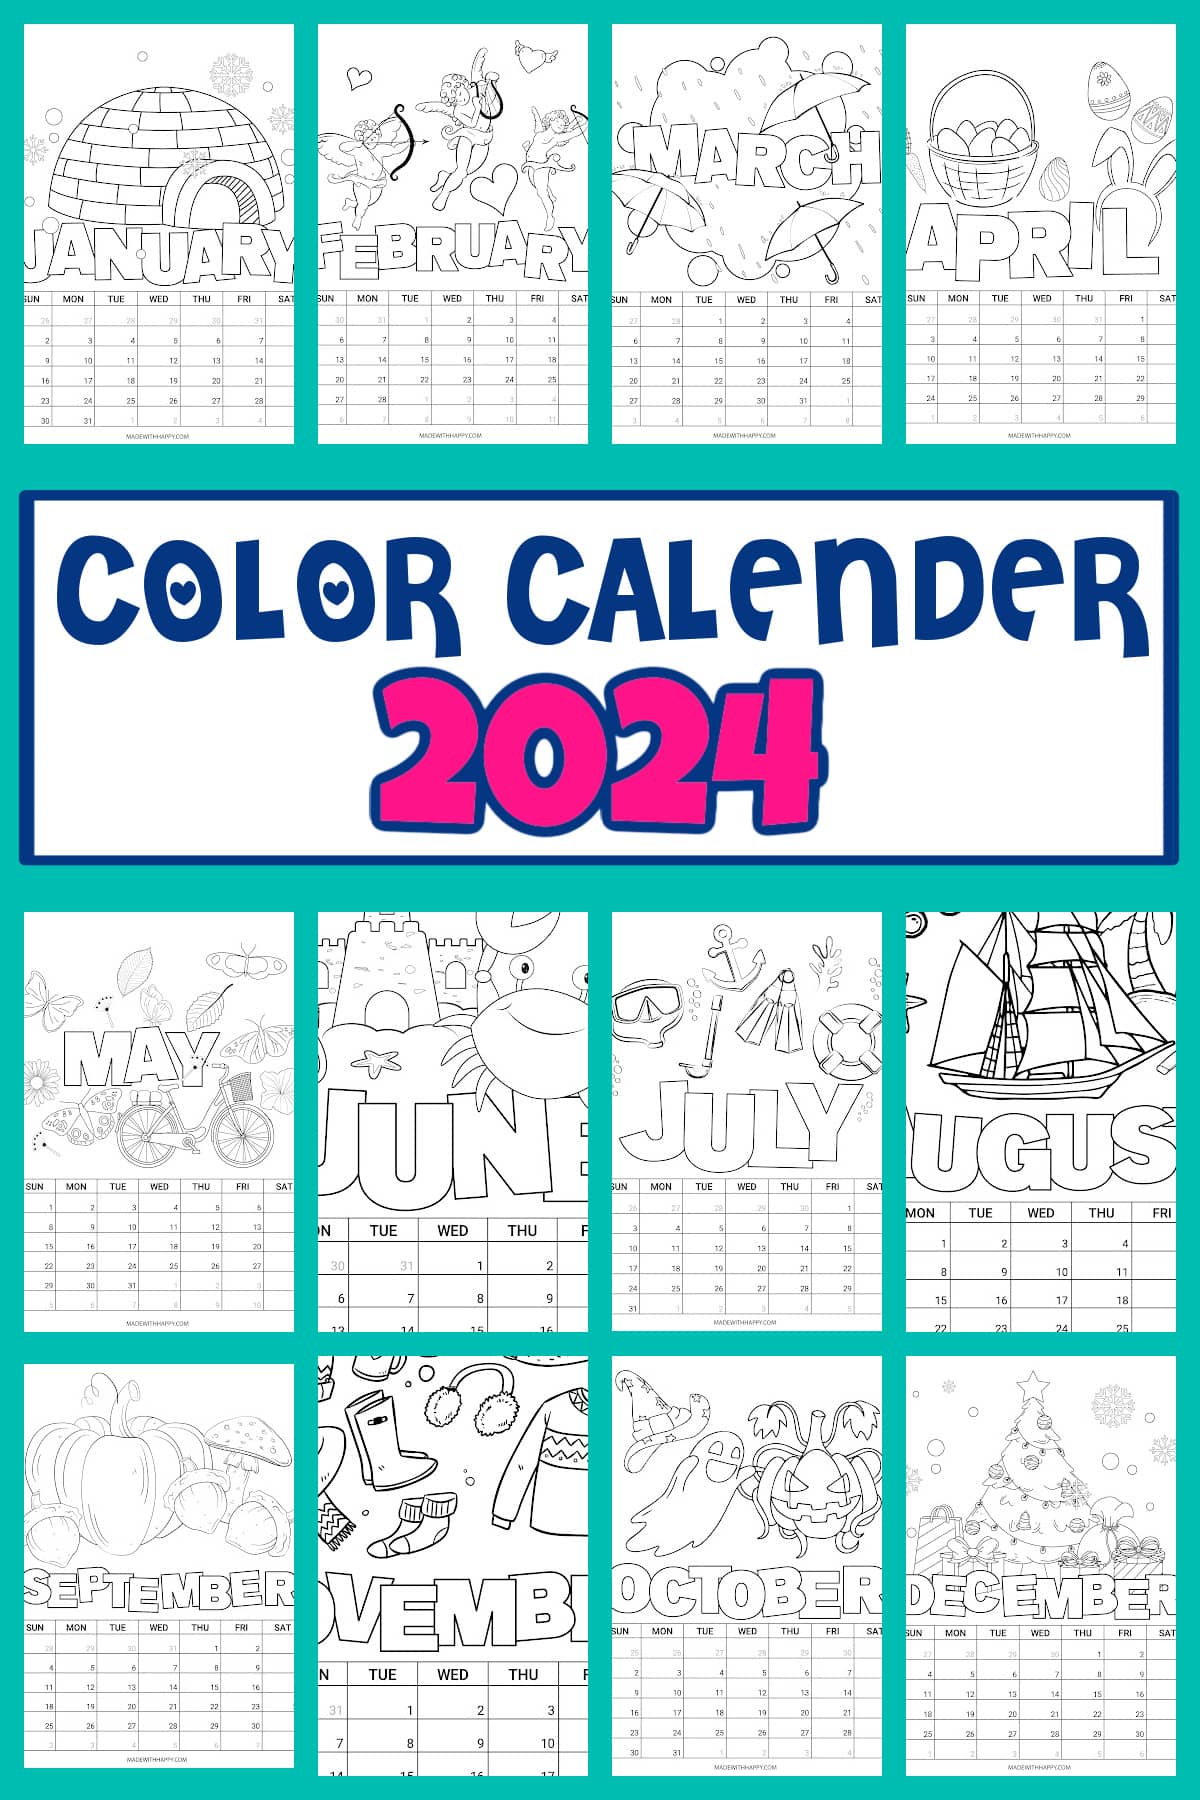 Find The Best 2024 Printable Calendar For Your Needs Children Free